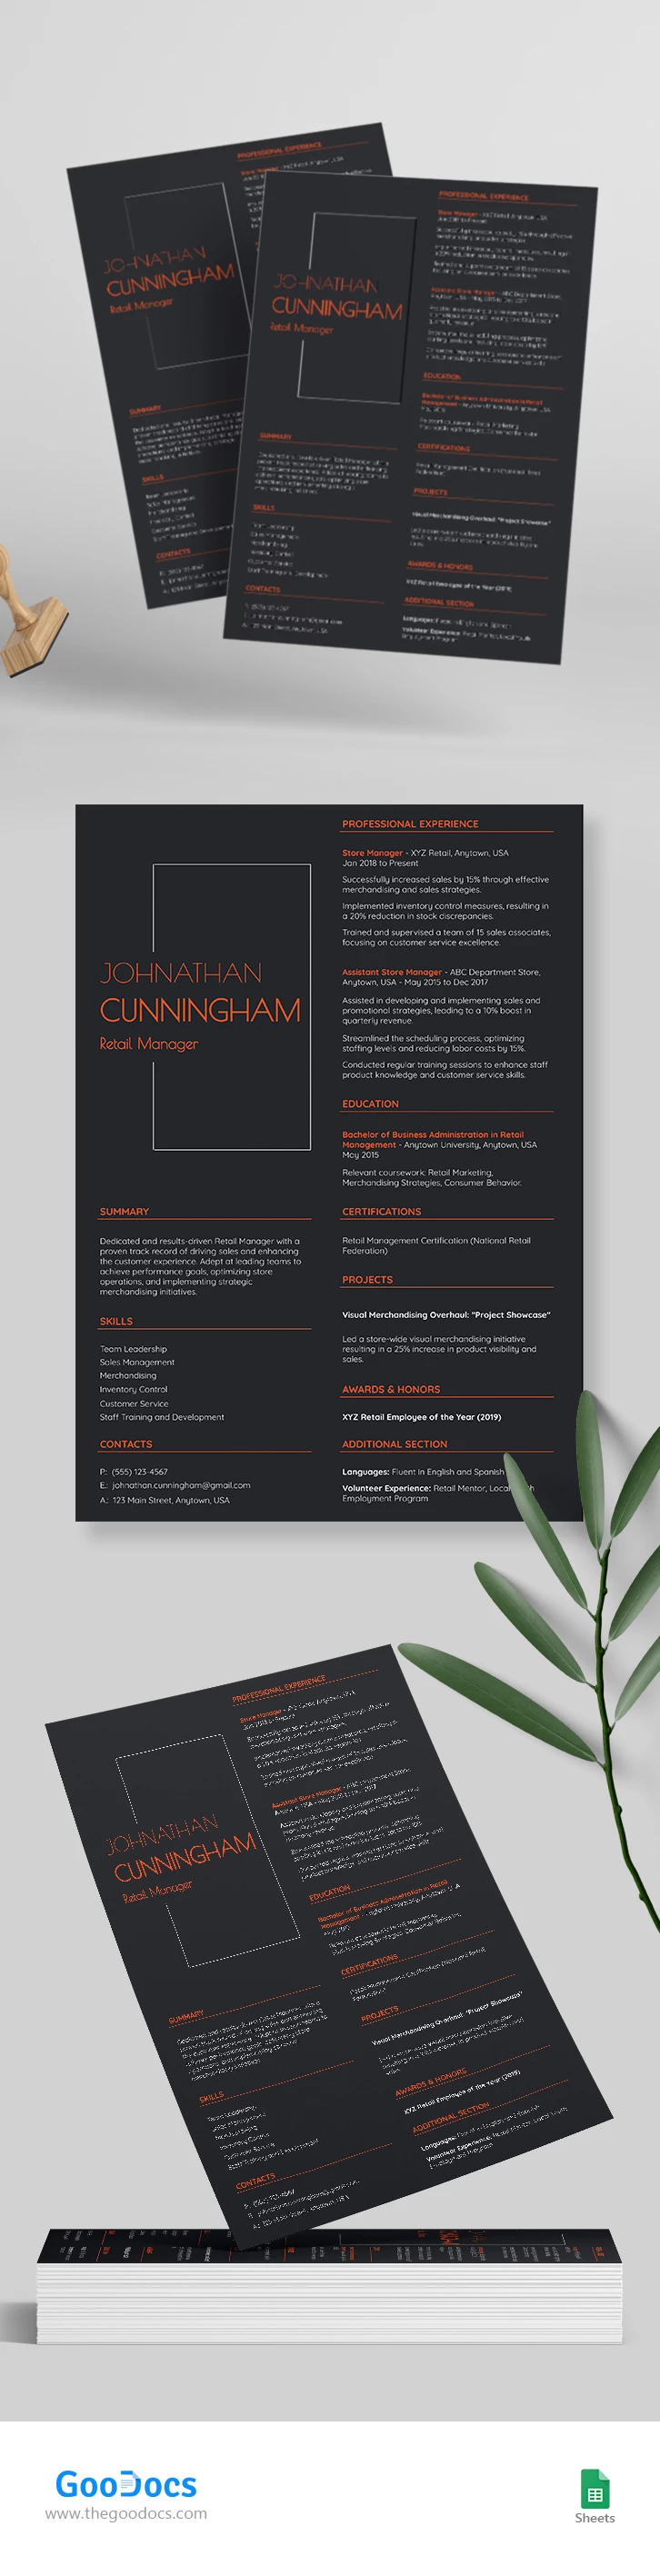 Curriculum Vitae Gestione Commerciale Ats Retail - free Google Docs Template - 10068084